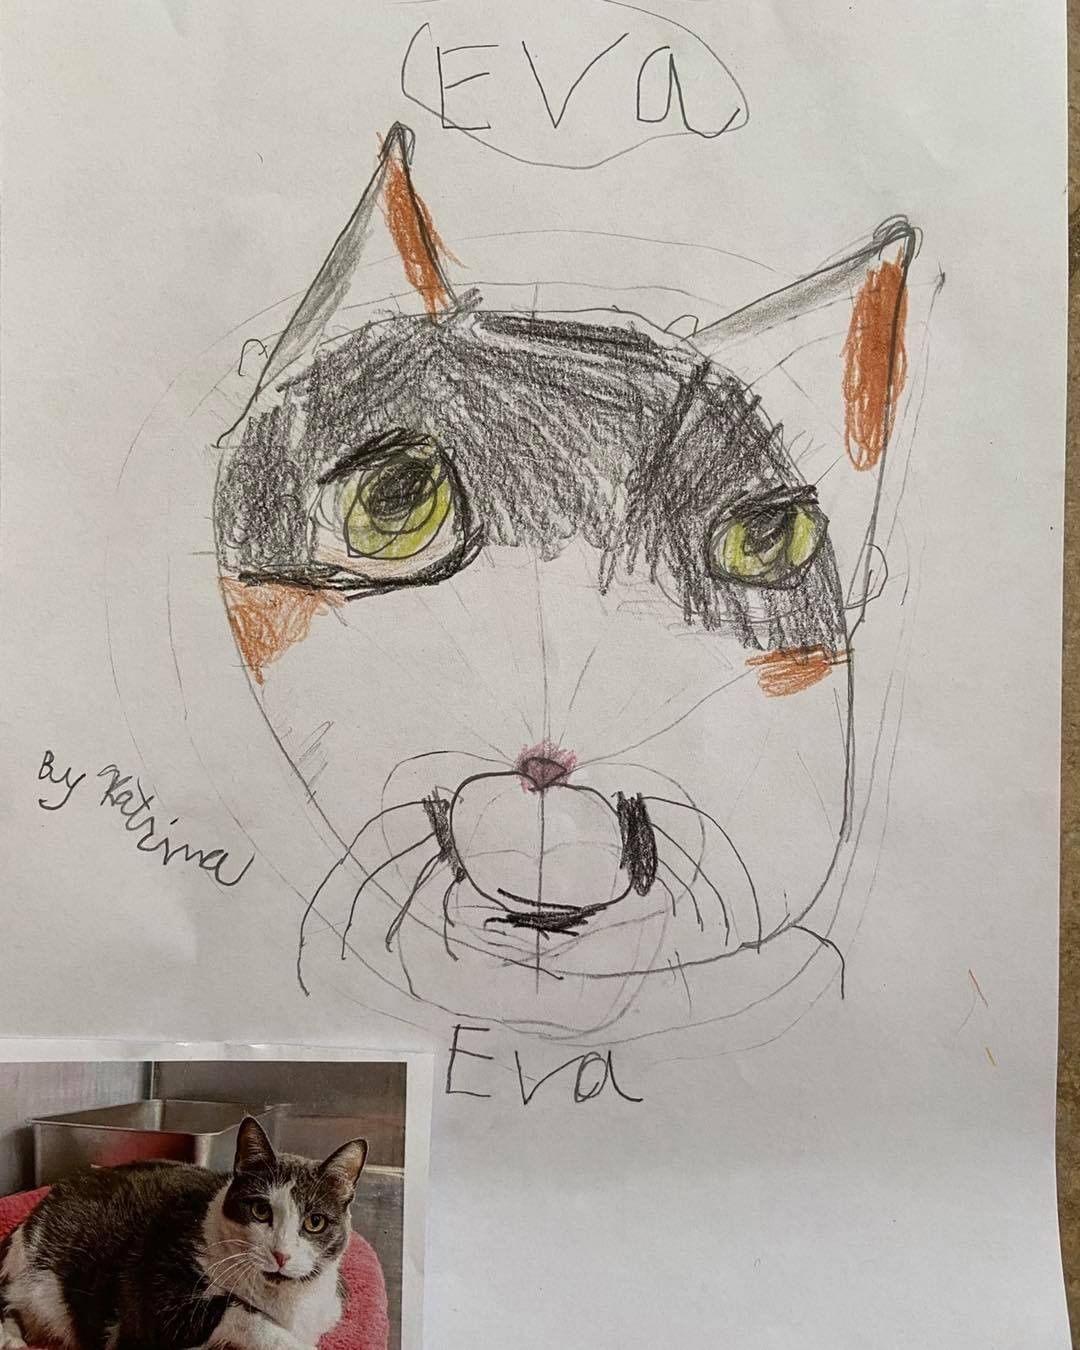 These drawings were by Ms Lakatos’ class at Hayes Elementary in Livonia! They also received credit towards the Michigan Green School Initiative for helping animals in need. Thank you kids! We have some great portraits here!